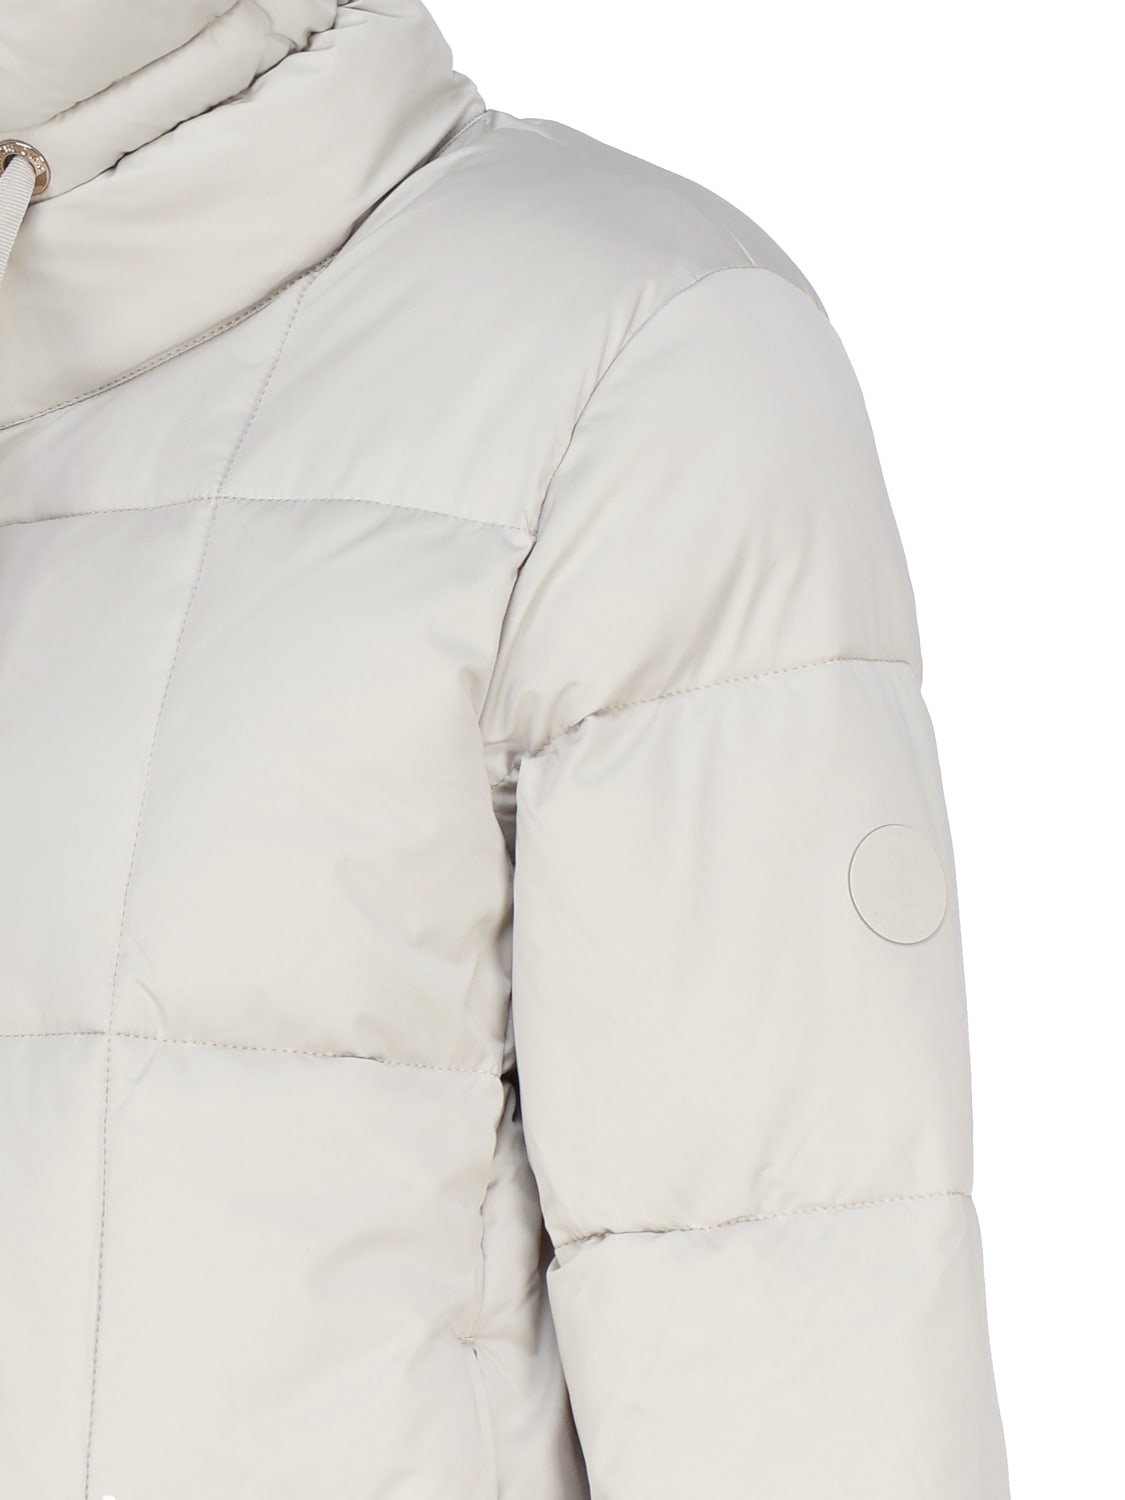 Shop Save The Duck High-neck Down Jacket